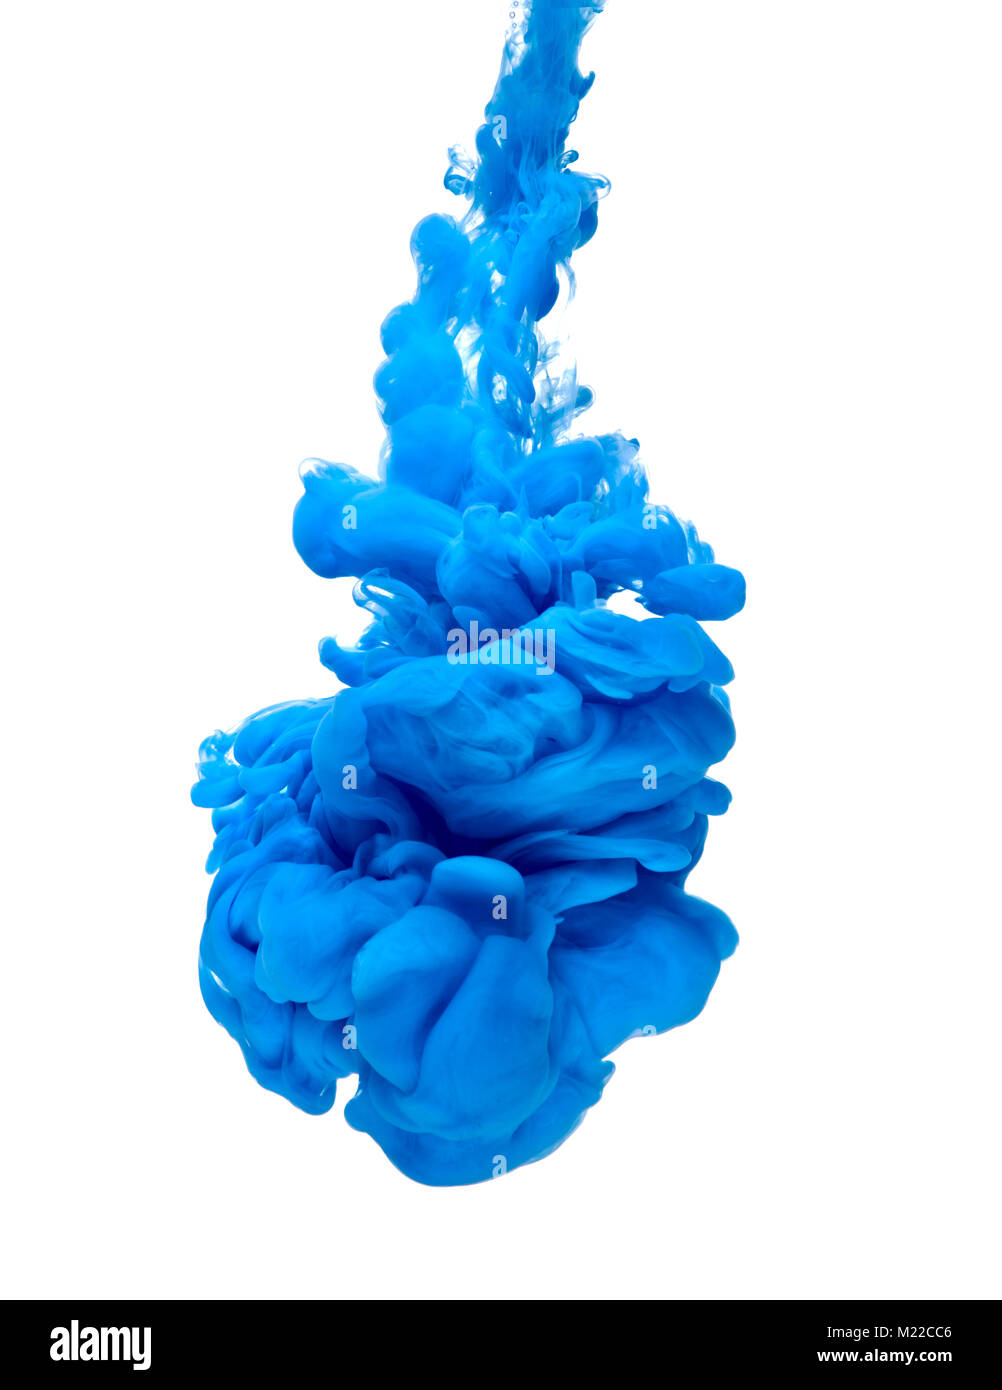 blue color paint pouring in water Stock Photo